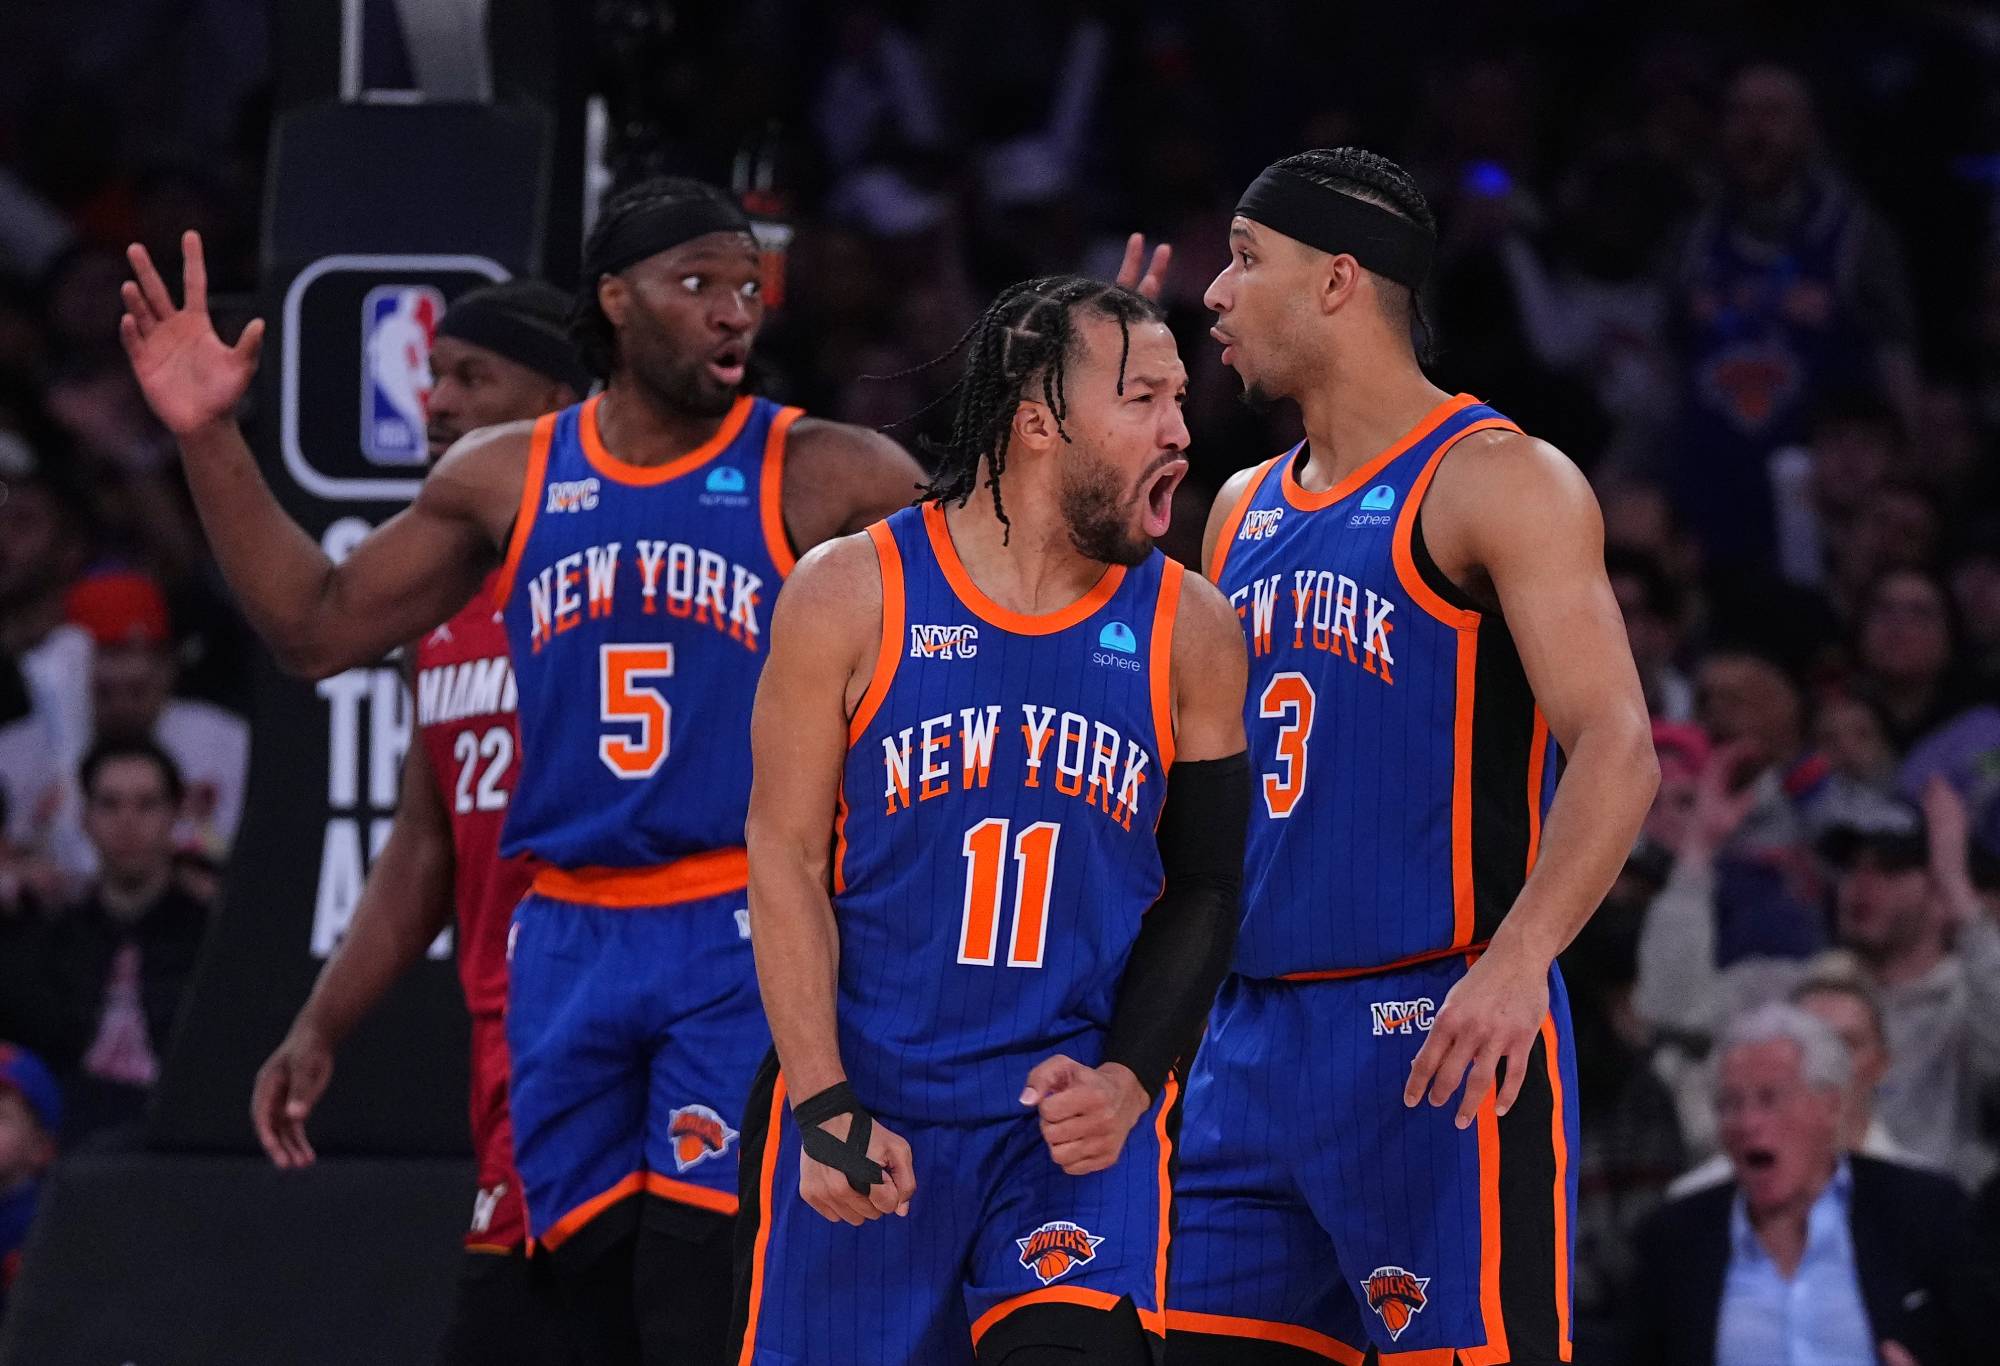 NEW YORK, NEW YORK - JANUARY 27: (L-R) Precious Achiuwa #5, Jalen Brunson #11 and Josh Hart #3 of the New York Knicks react against the Miami Heat in the second half at Madison Square Garden on January 27, 2024 in New York City. The Knicks defeated the Heat 125-109. NOTE TO USER: User expressly acknowledges and agrees that, by downloading and or using this photograph, User is consenting to the terms and conditions of the Getty Images License Agreement. (Photo by Mitchell Leff/Getty Images)